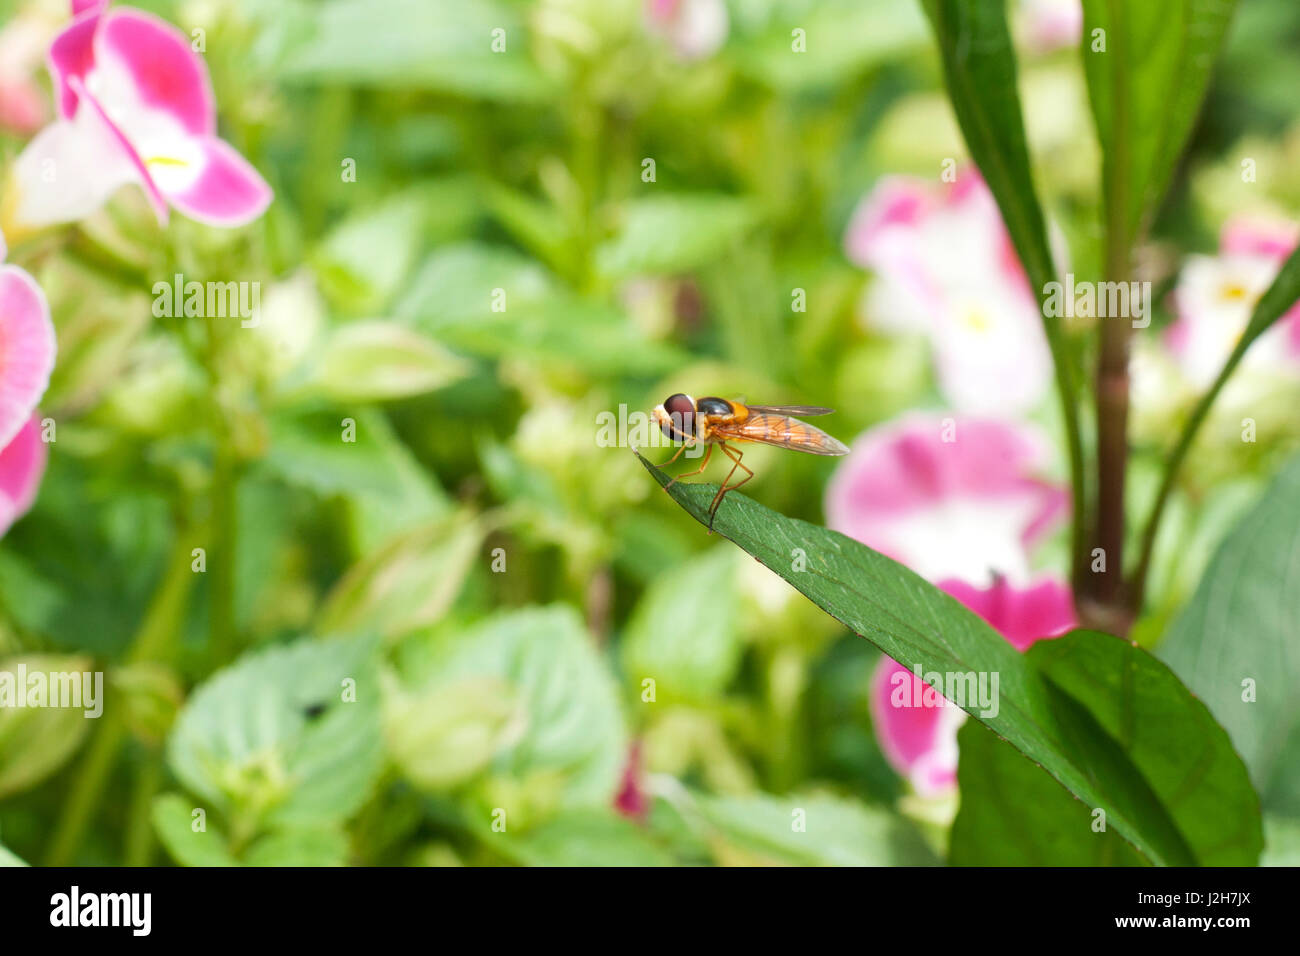 One small yellow black fly with red eyes insect sitting on green leave surrounded by pink white flowers. Stock Photo